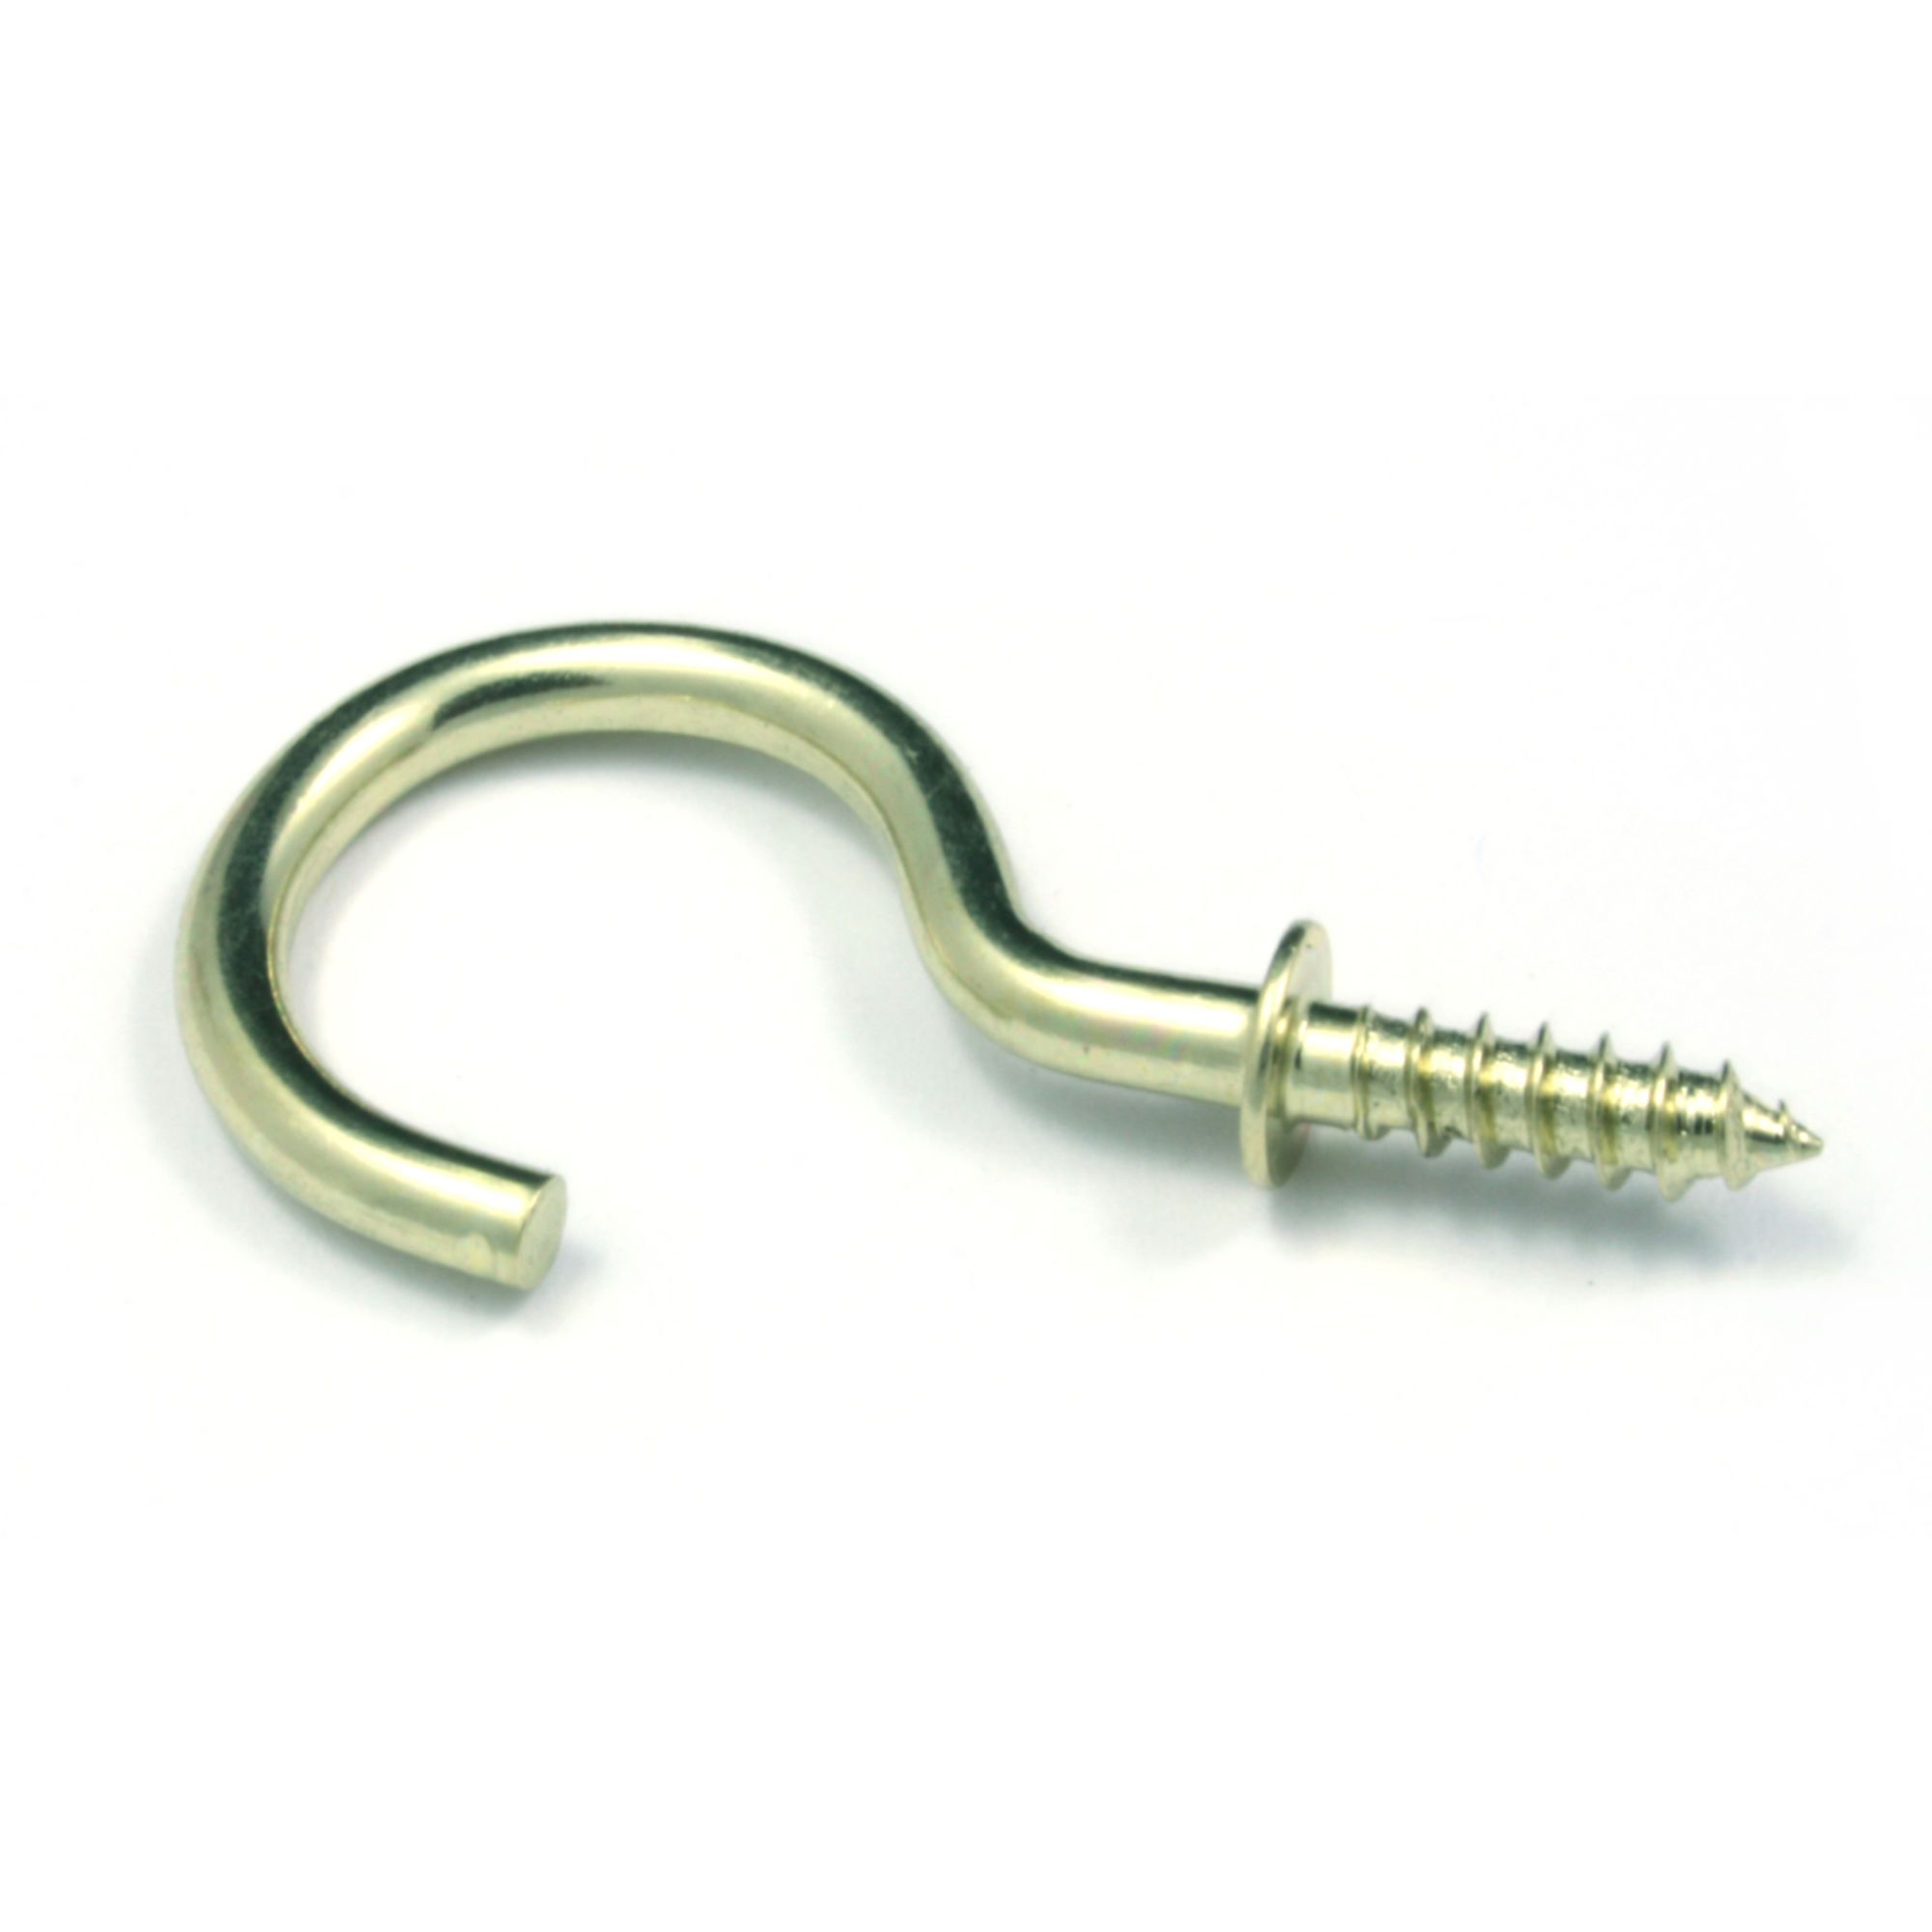 Cup hooks metric thread, galvanized - Cup hooks - Steel wire ropes and  chains accessories - Products